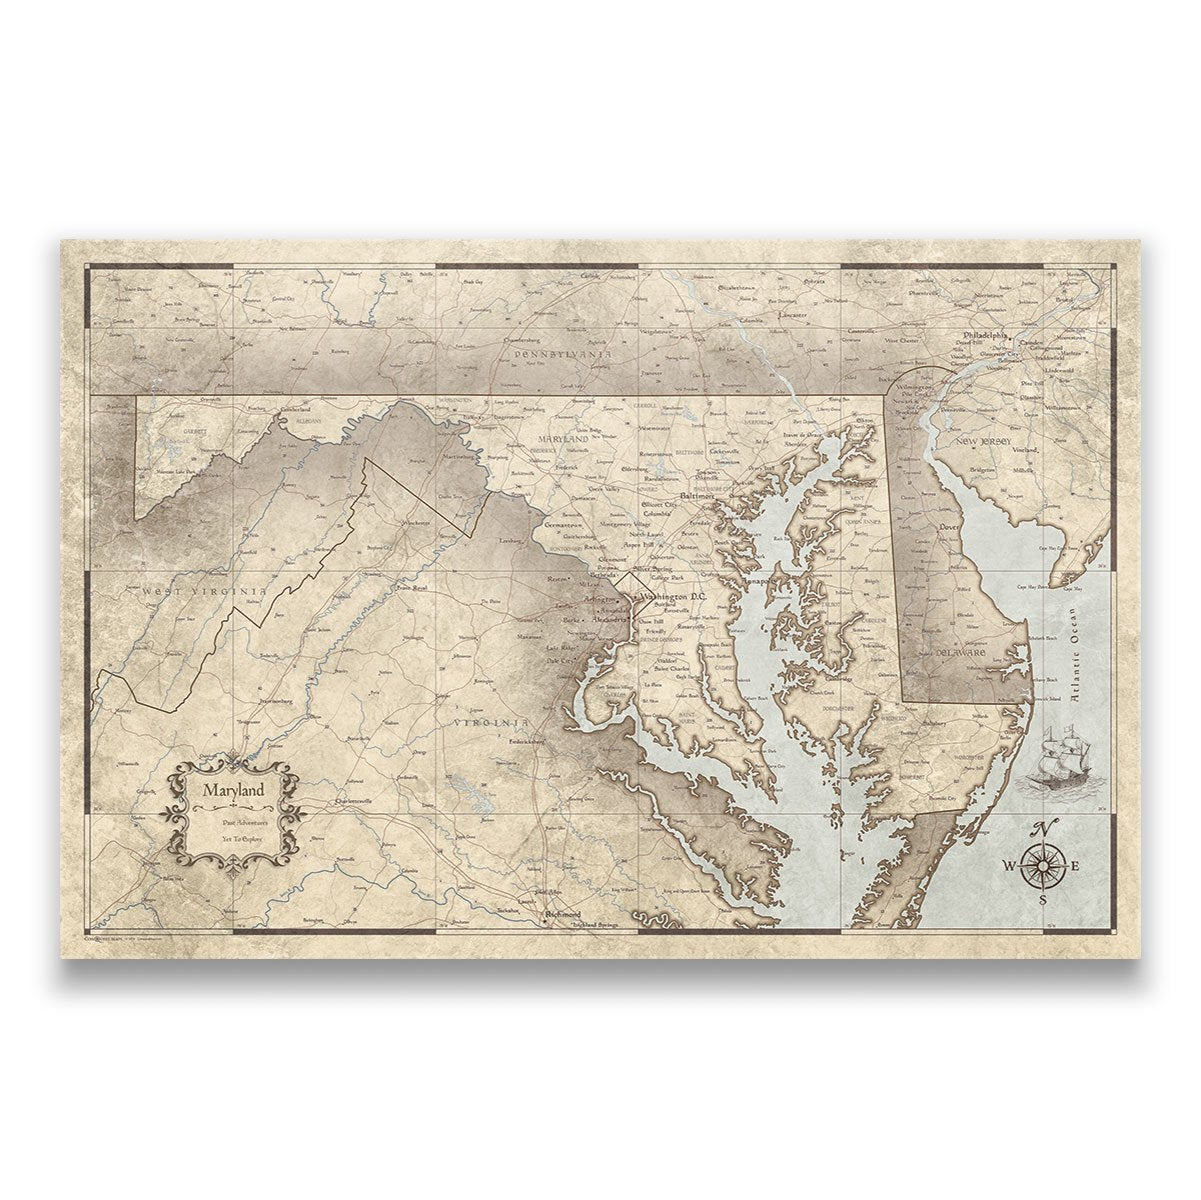 Maryland Poster Maps